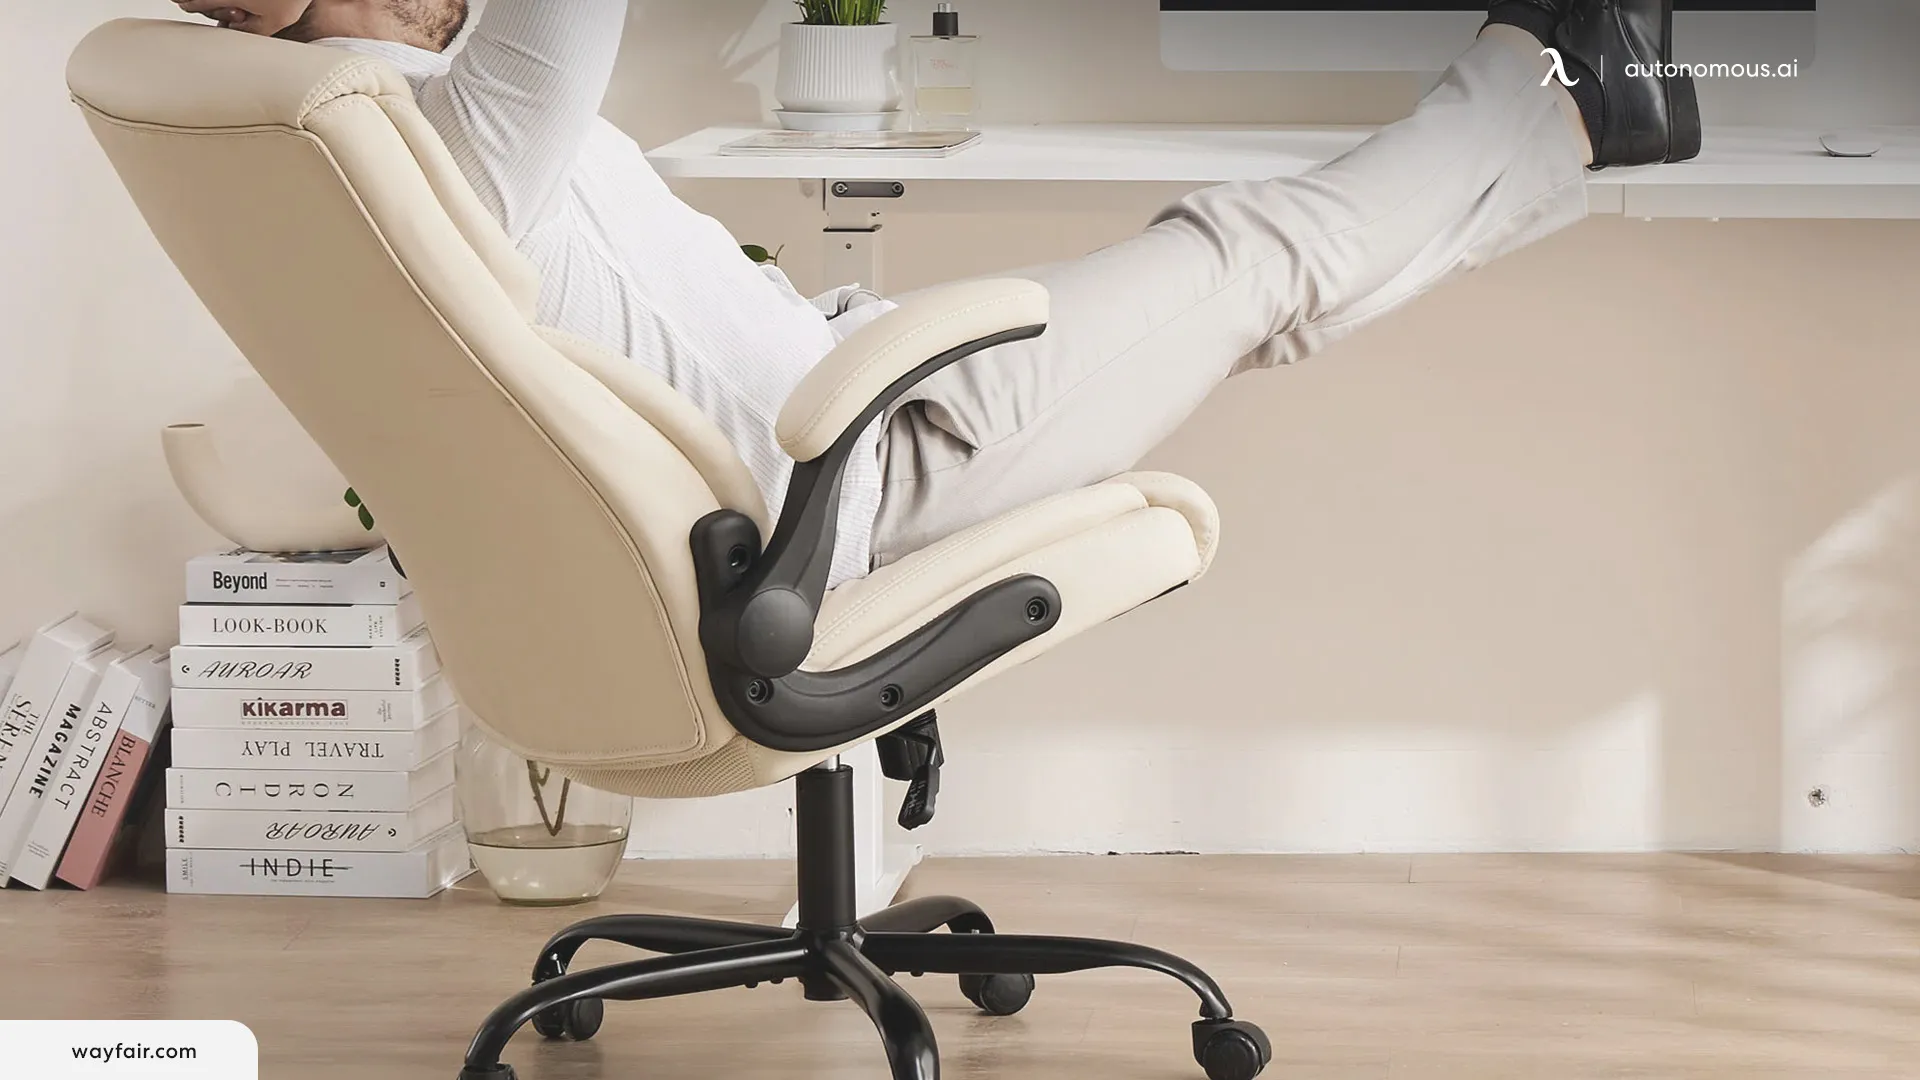 Portable Seating Solutions for Flexible Bedroom Office Arrangements